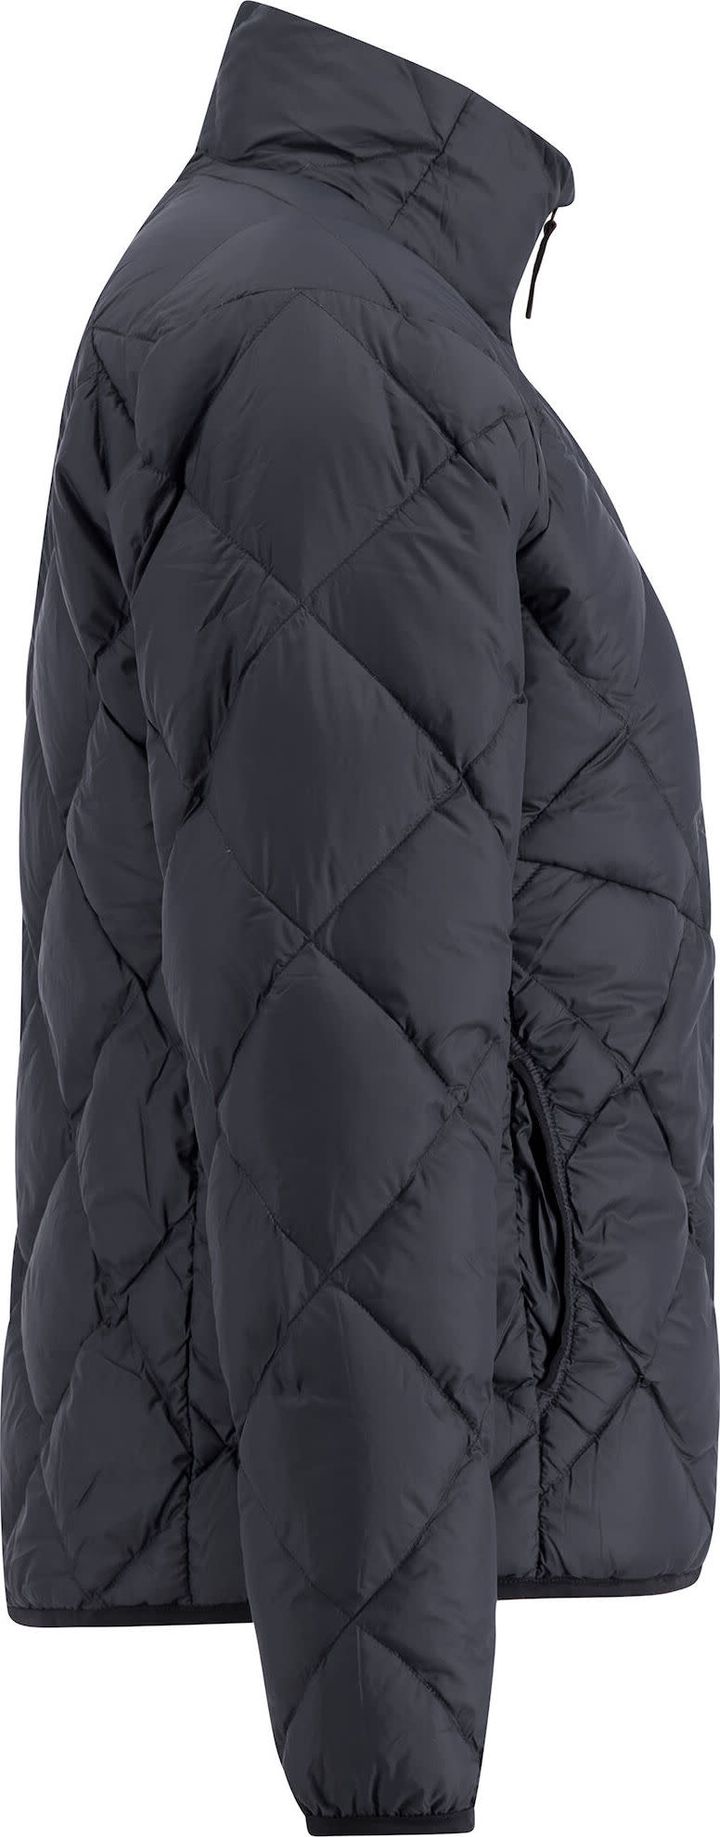 Lundhags Women's Tived Down Jacket Black Lundhags